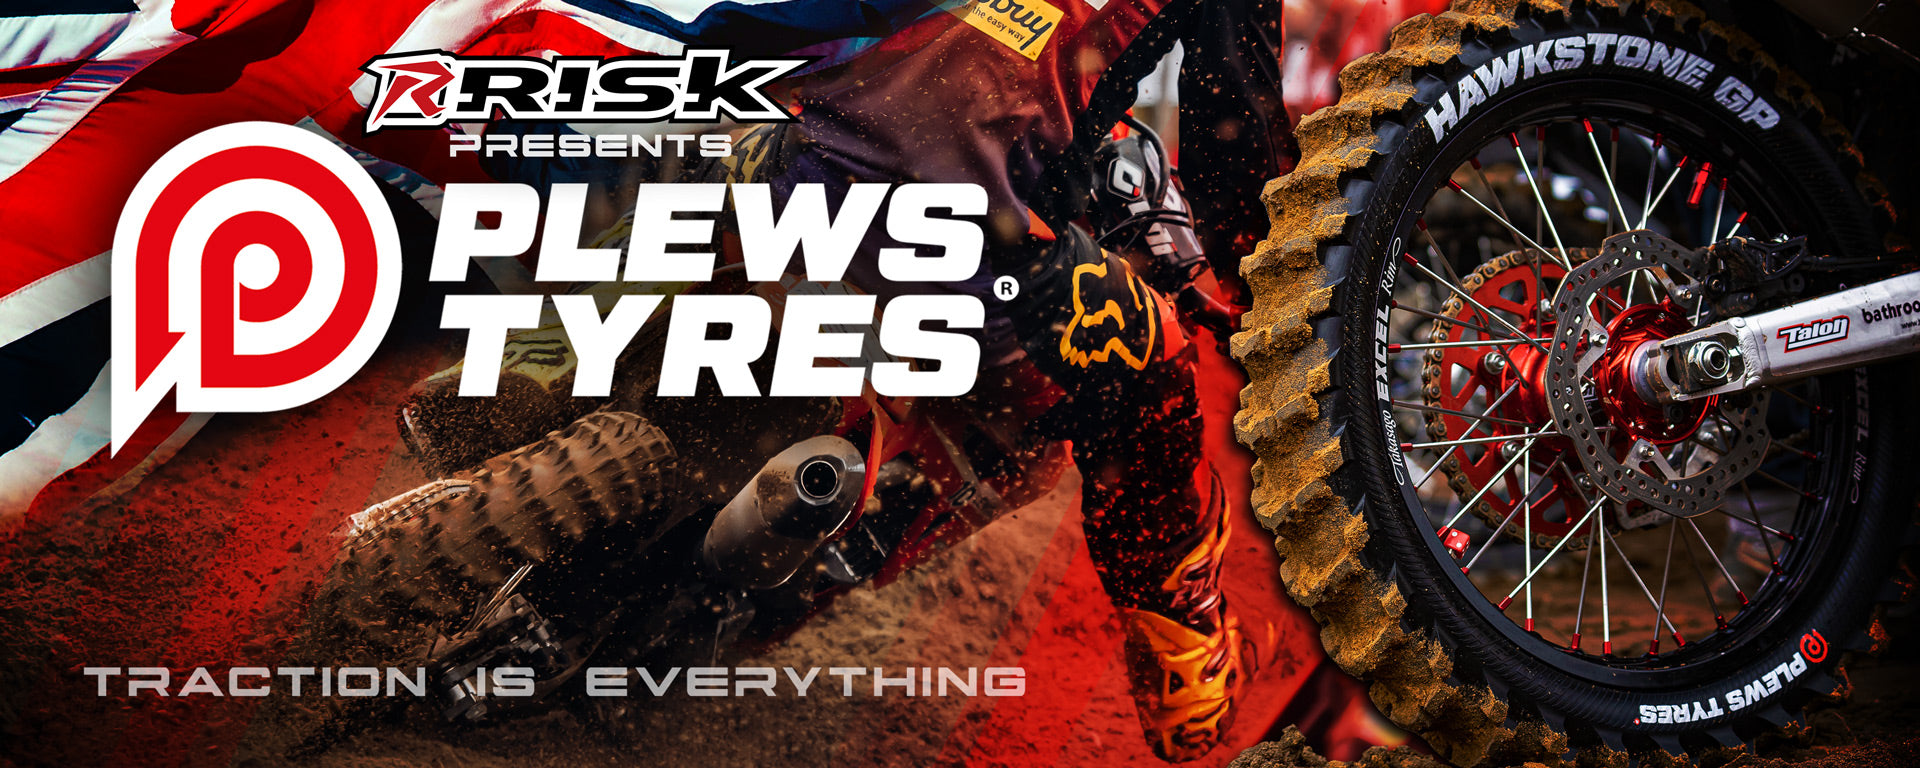 Plews Tyres Banner featuring a motocross racer from the back leaning into a turn and throwing dirt. Also features a rear tire mounted on a bike and a British flag. Text reads: Launching Now. Risk presents Plews Tyres. Traction is Everything.